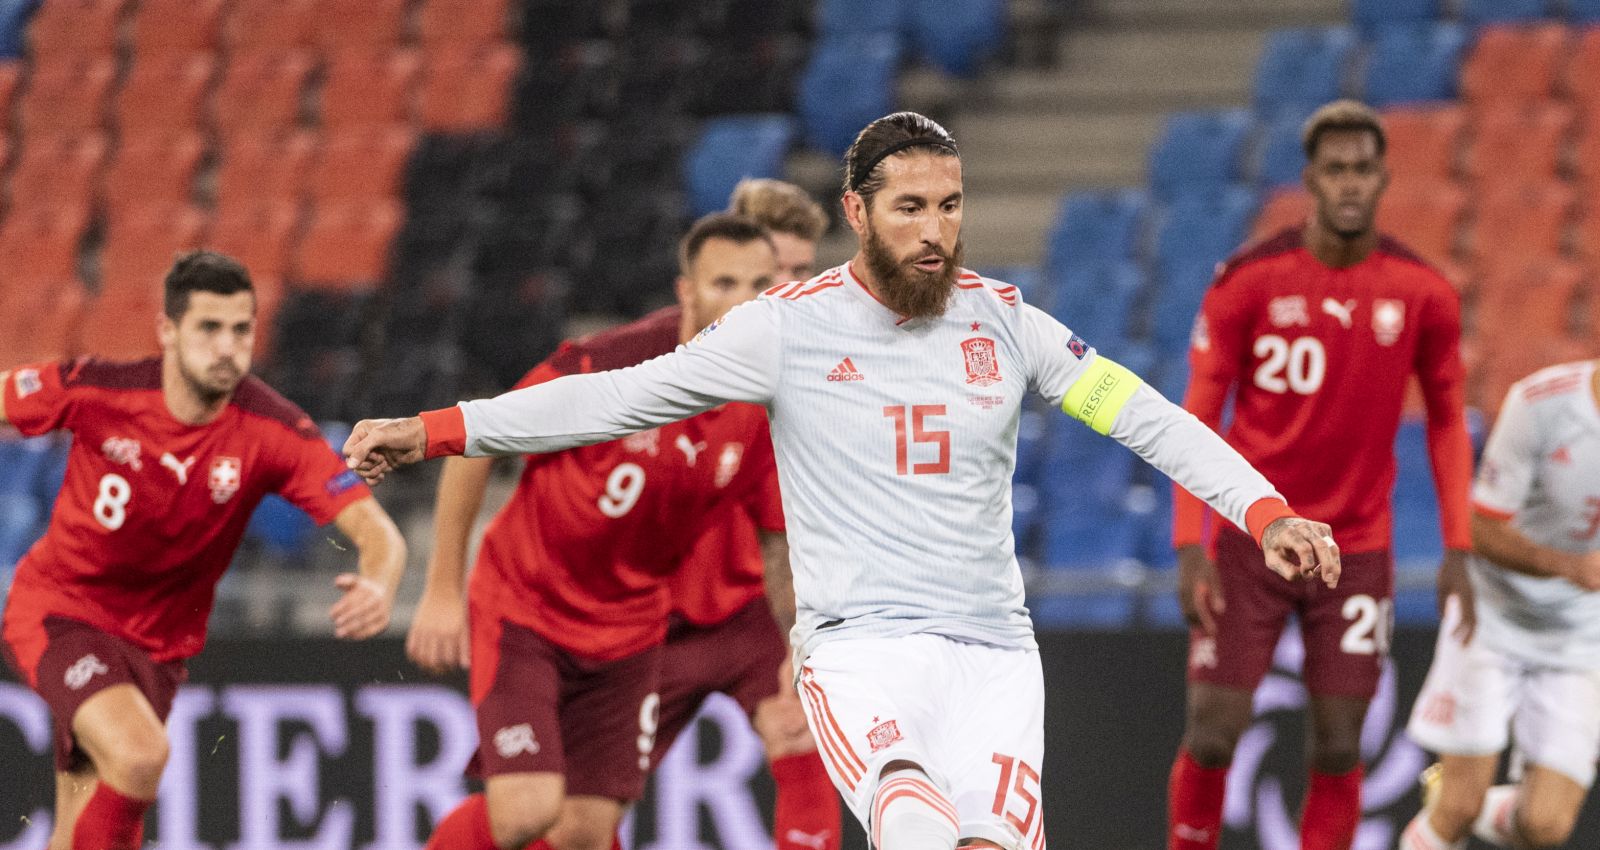 epa08820831 Spain's Sergio Ramos (front) misses a penalty during the UEFA Nations League soccer match between Switzerland and Spain at St. Jakob-Park stadium in Basel, Switzerland, 14 November 2020.  EPA/ALESSANDRO DELLA VALLE